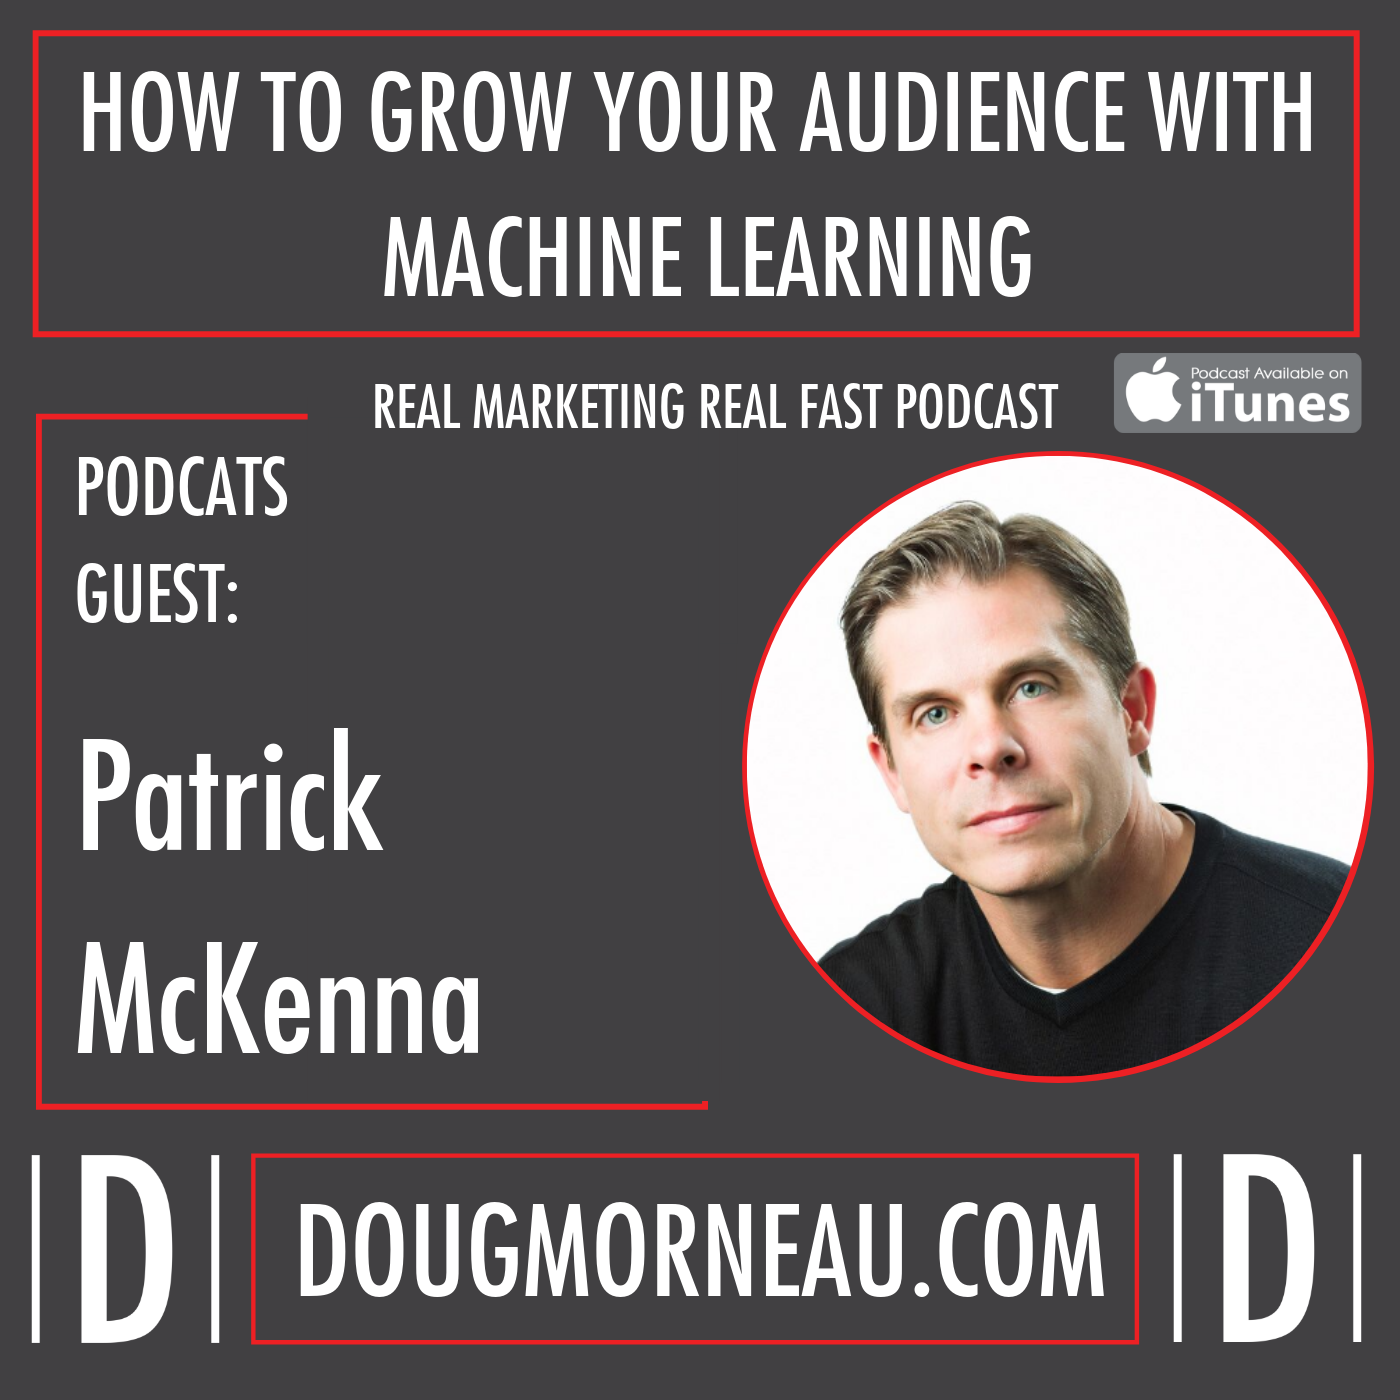 HOW TO GROW YOUR AUDIENCE WITH MACHINE LEARNING - PATRICK MCKENNA - DOUG MORNEAU - REAL MARKETING REAL FAST PODCAST